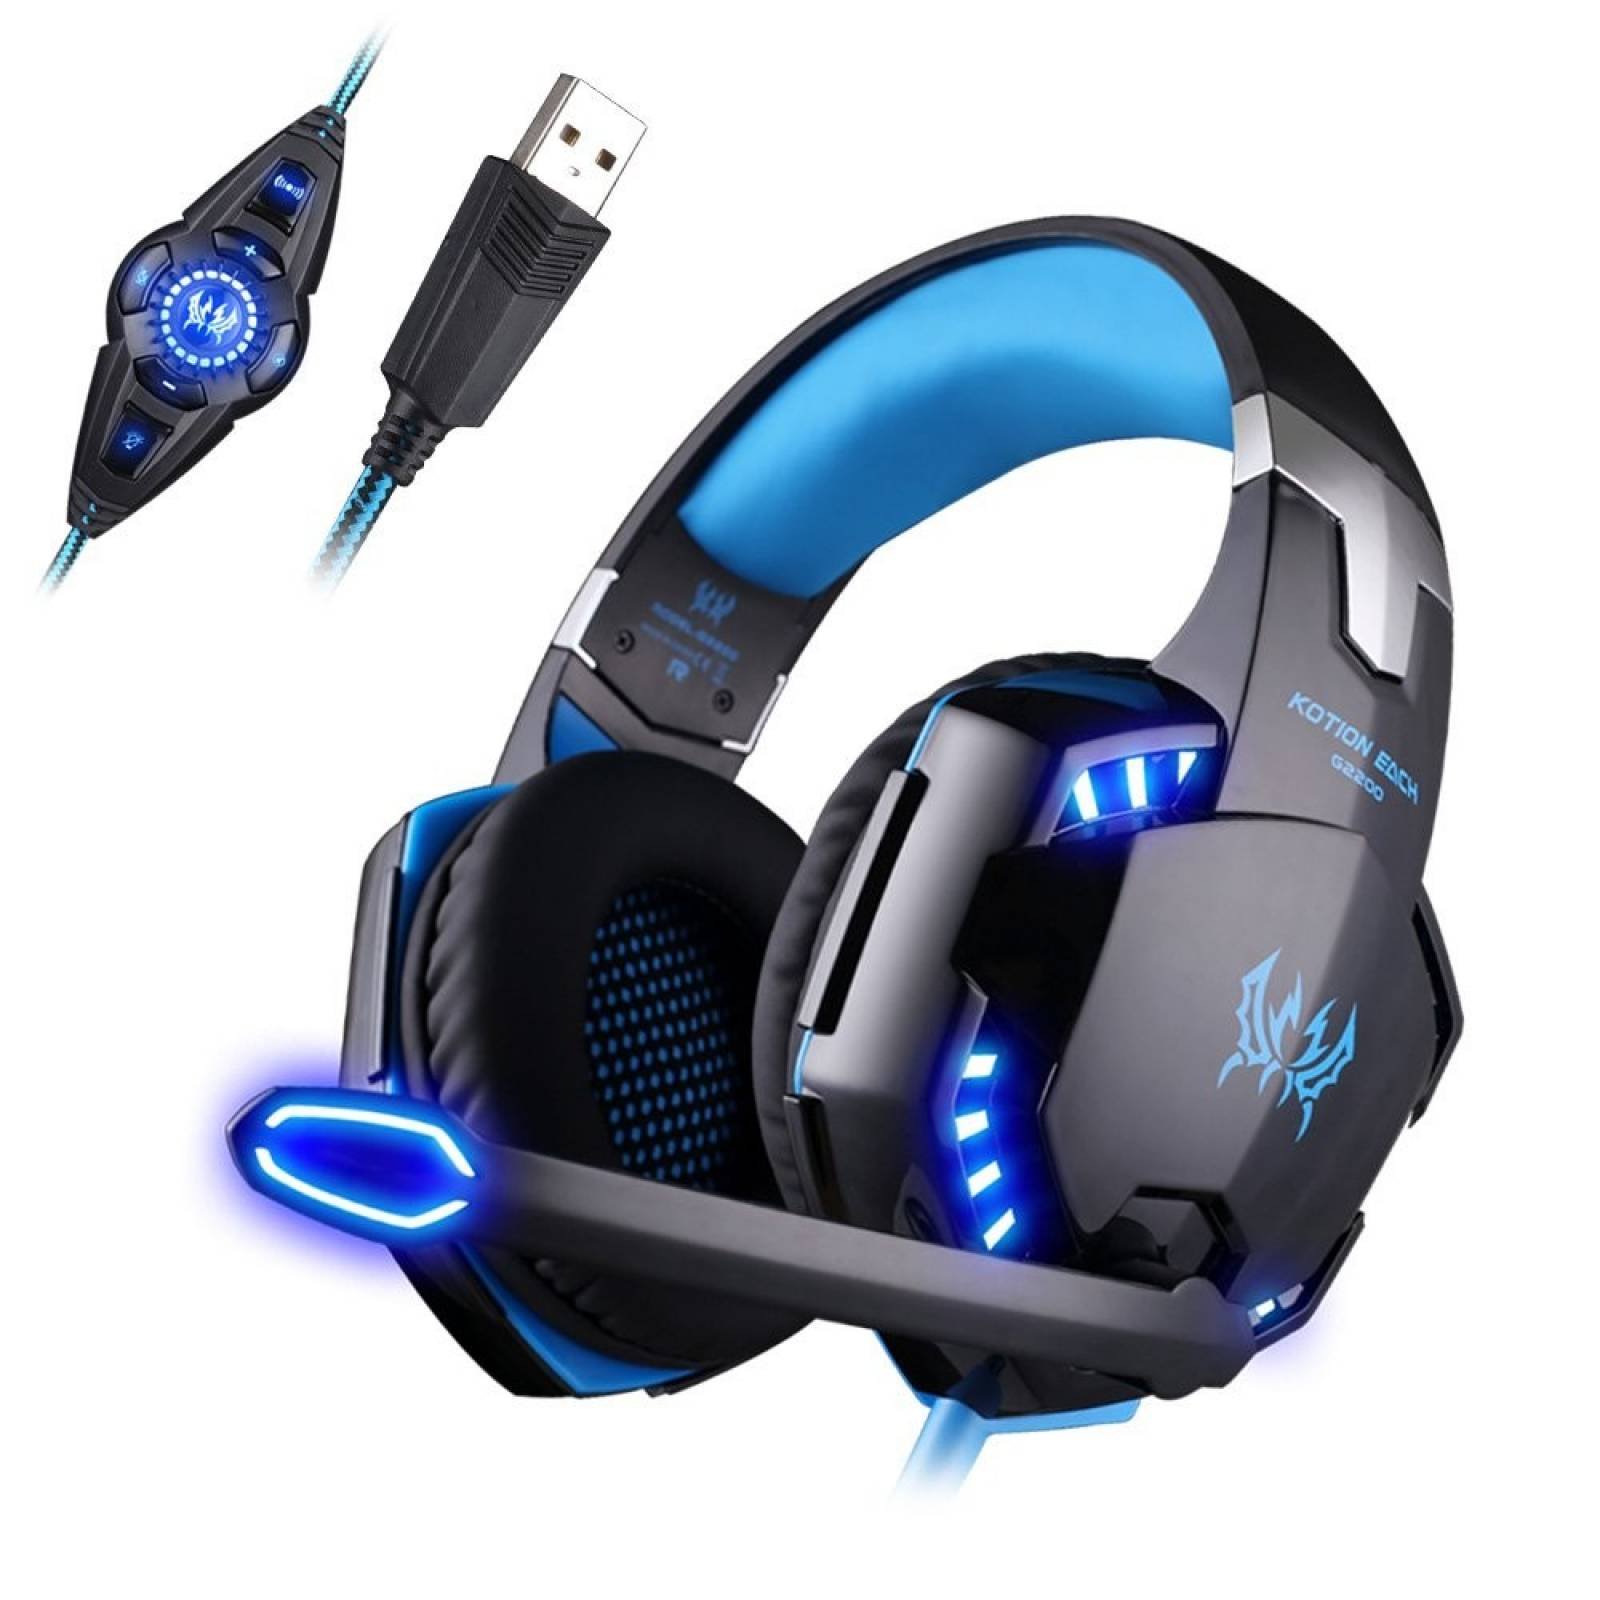 Gaming headset 7.1. Игровые наушники 7.1. Fifine Dynamic RGB Gaming Headset with Mic over-Ear Headphones 7.1 Surround Sound PC ps4 ps5 3. KOTION each логотип.